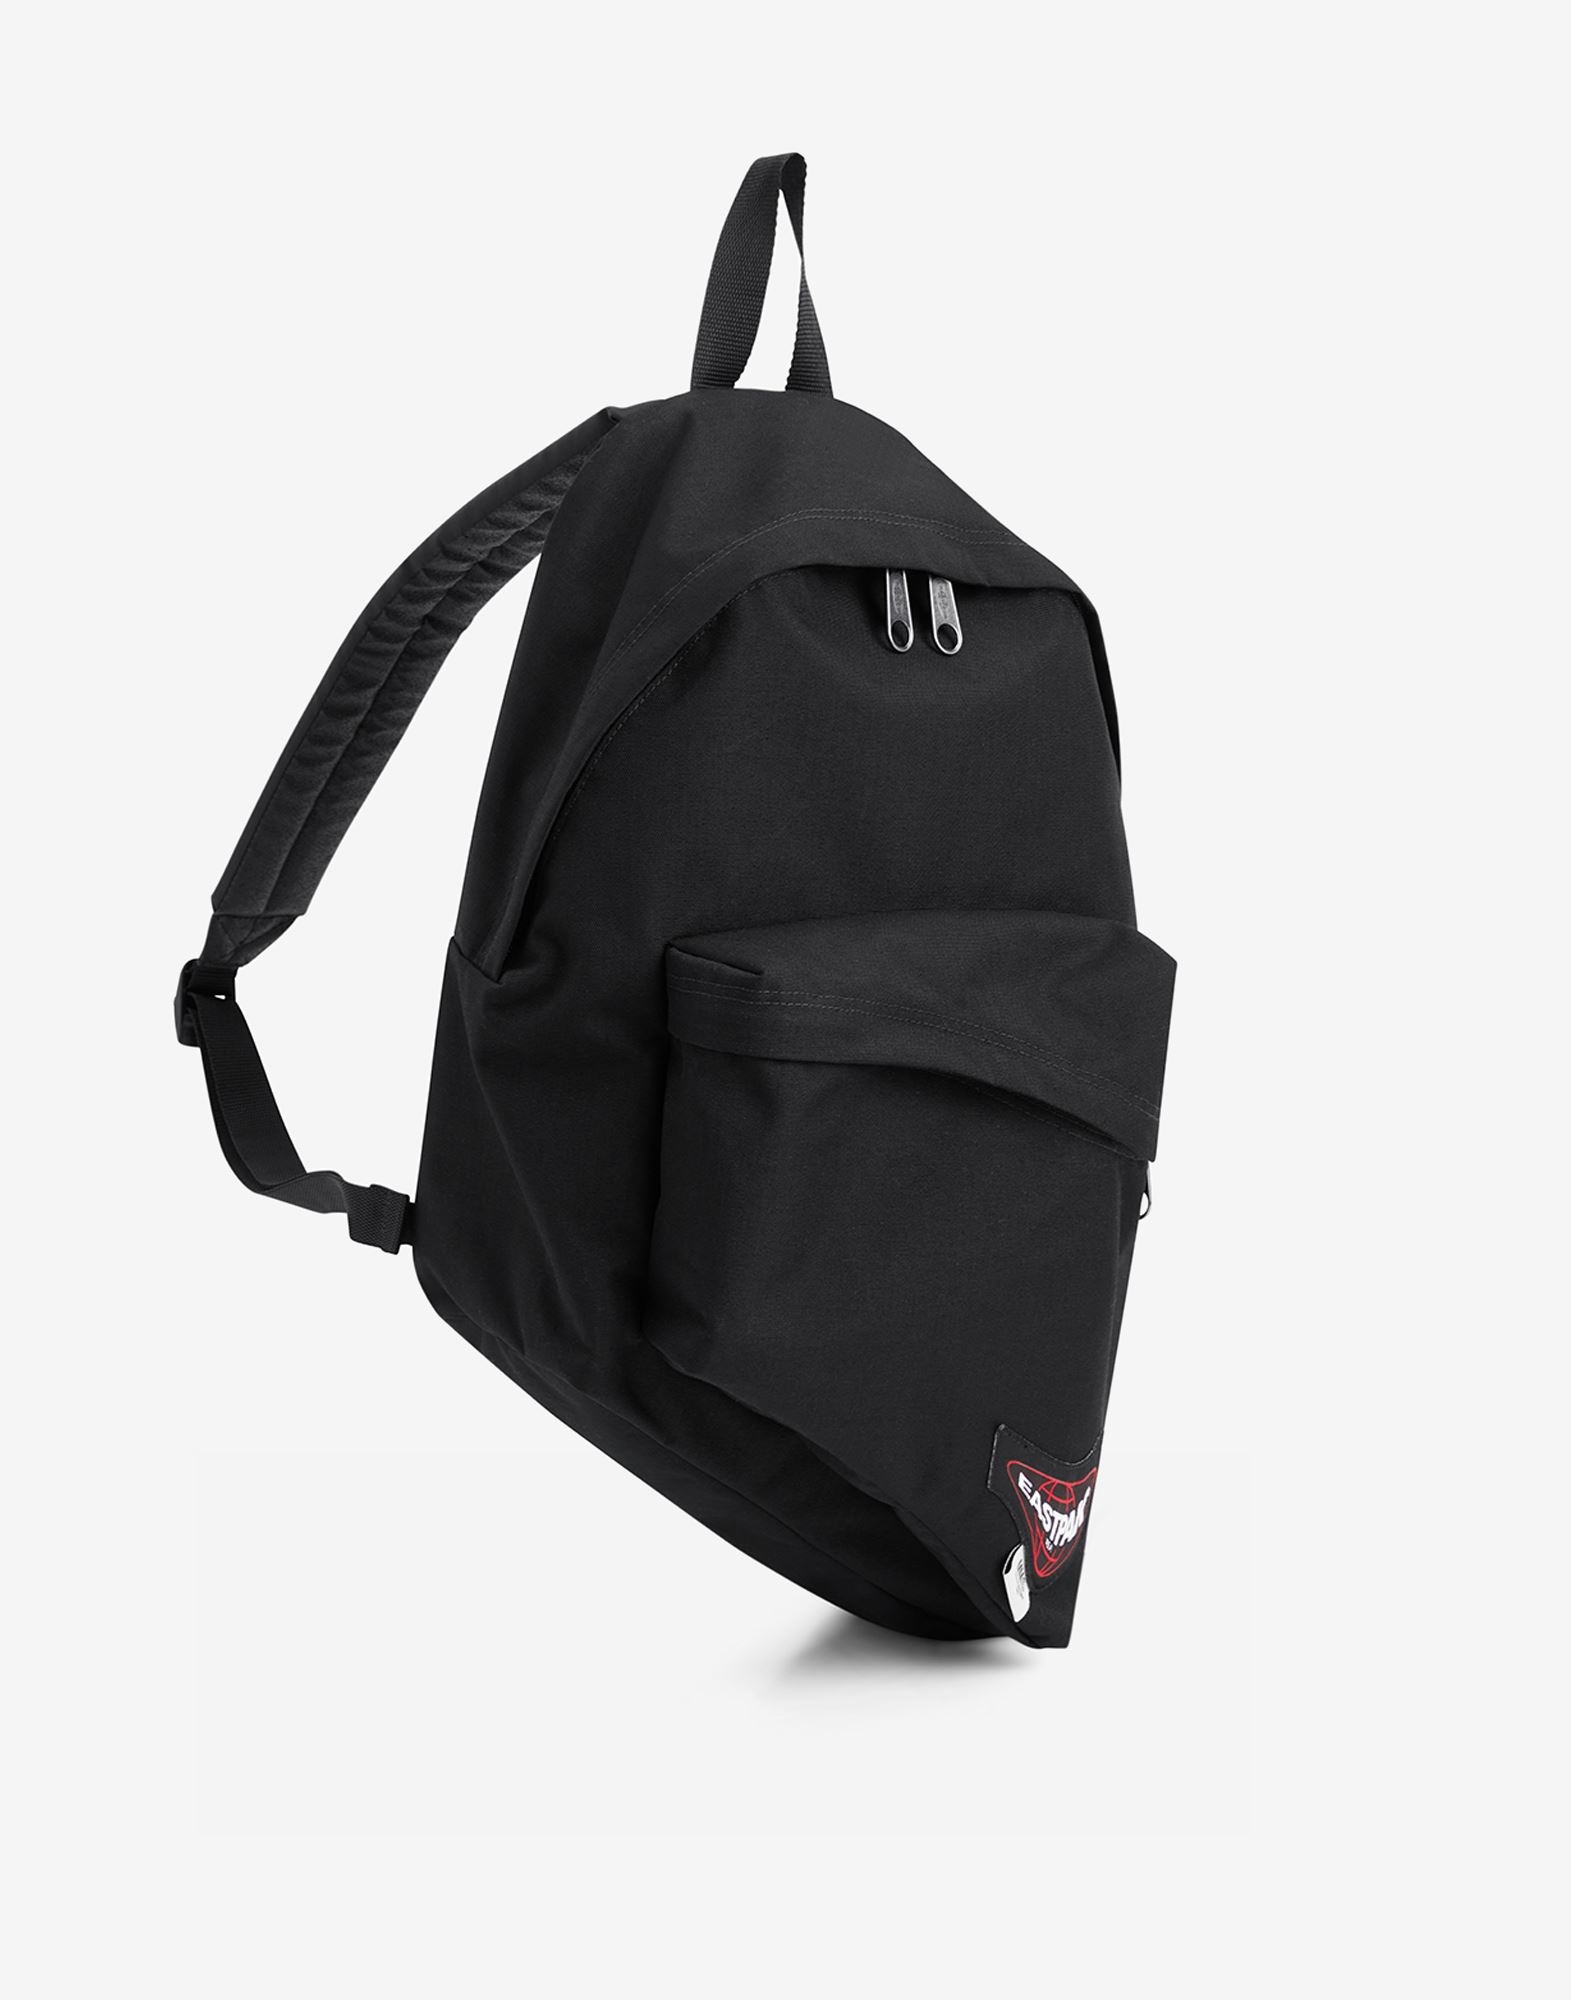 MM6 x Eastpak
Dripping Backpack - 2